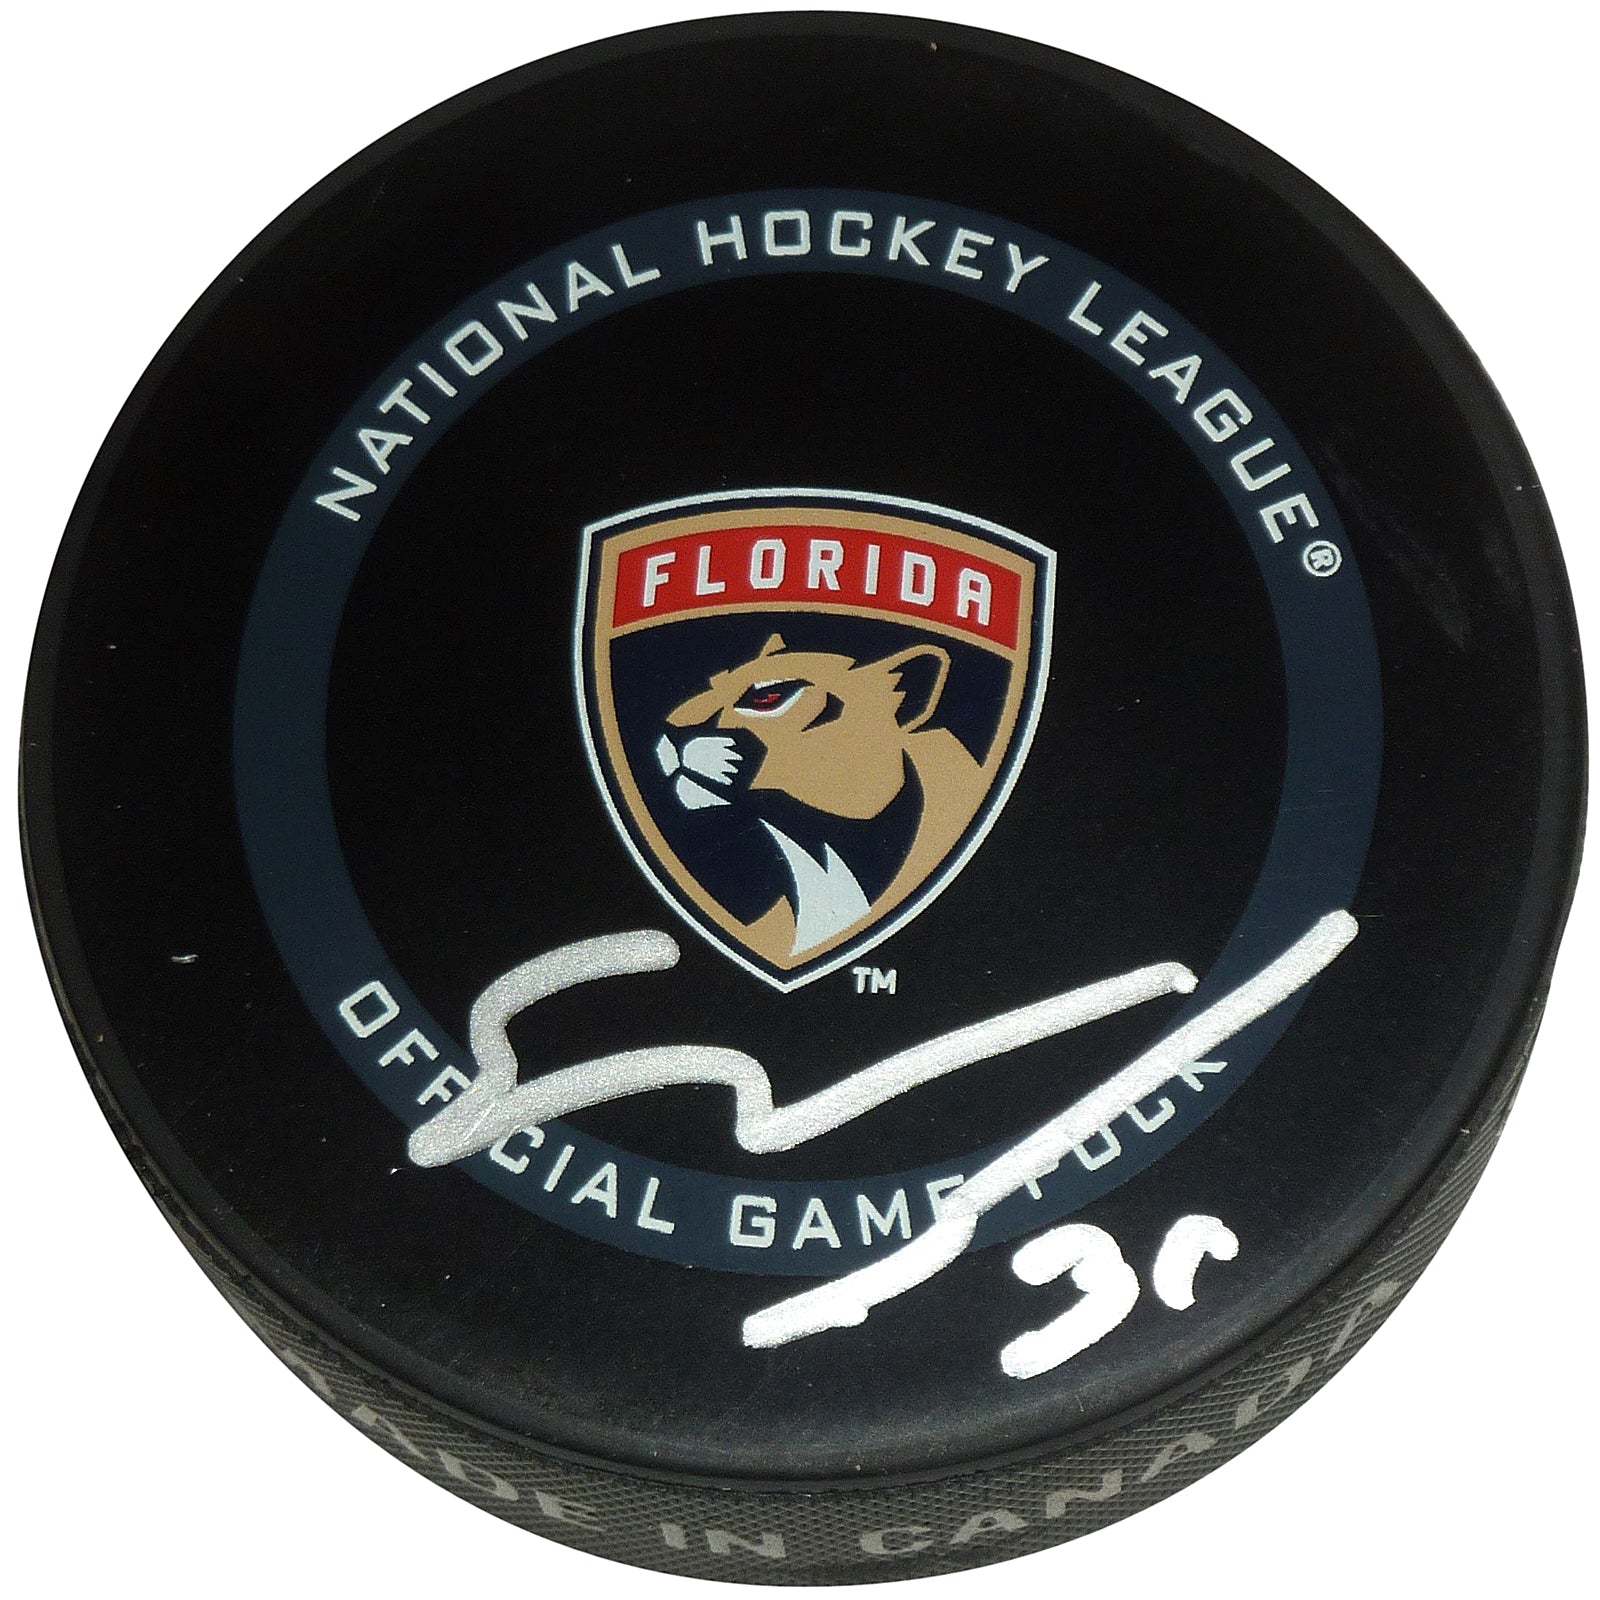 Spencer Knight Autographed Florida Panthers Official Game Hockey Puck in Cube - Fanatics